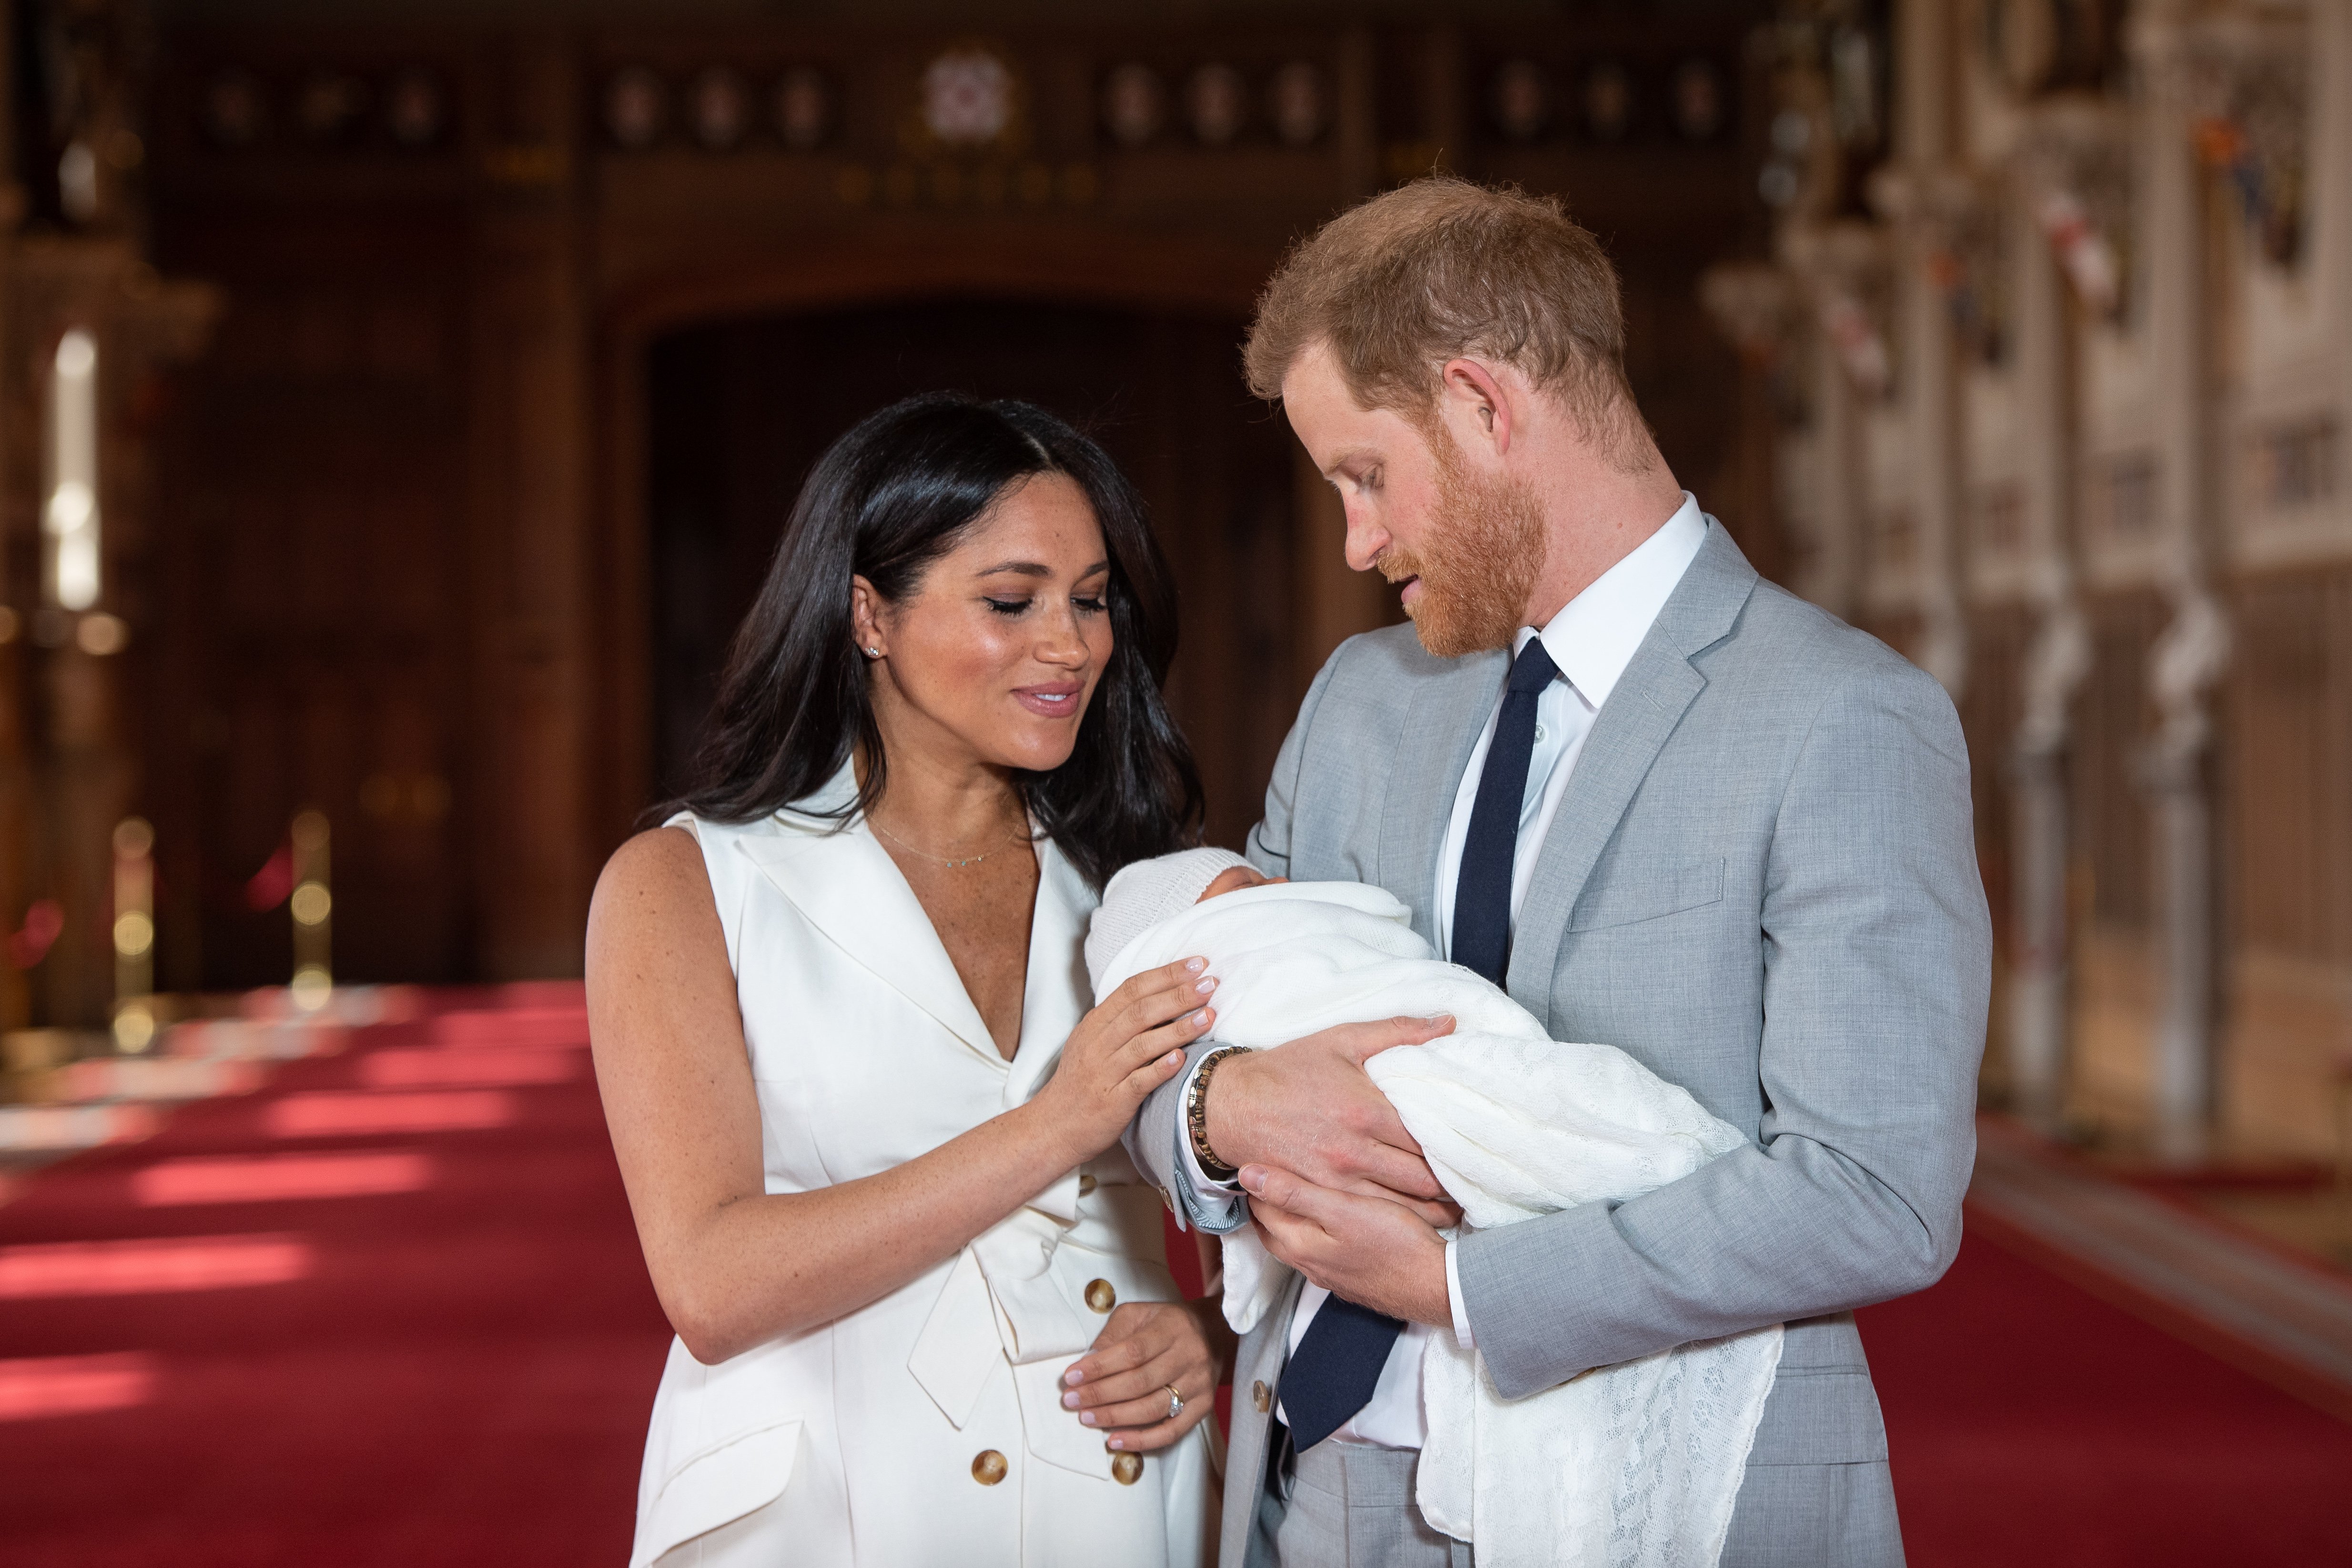 Prince Harry, Duke of Sussex and Meghan, Duchess of Sussex, pose with their newborn son Archie Harrison Mountbatten-Windsor during a photocall in St George's Hall at Windsor Castle on May 8, 2019 in Windsor, England. | Source: Getty Images